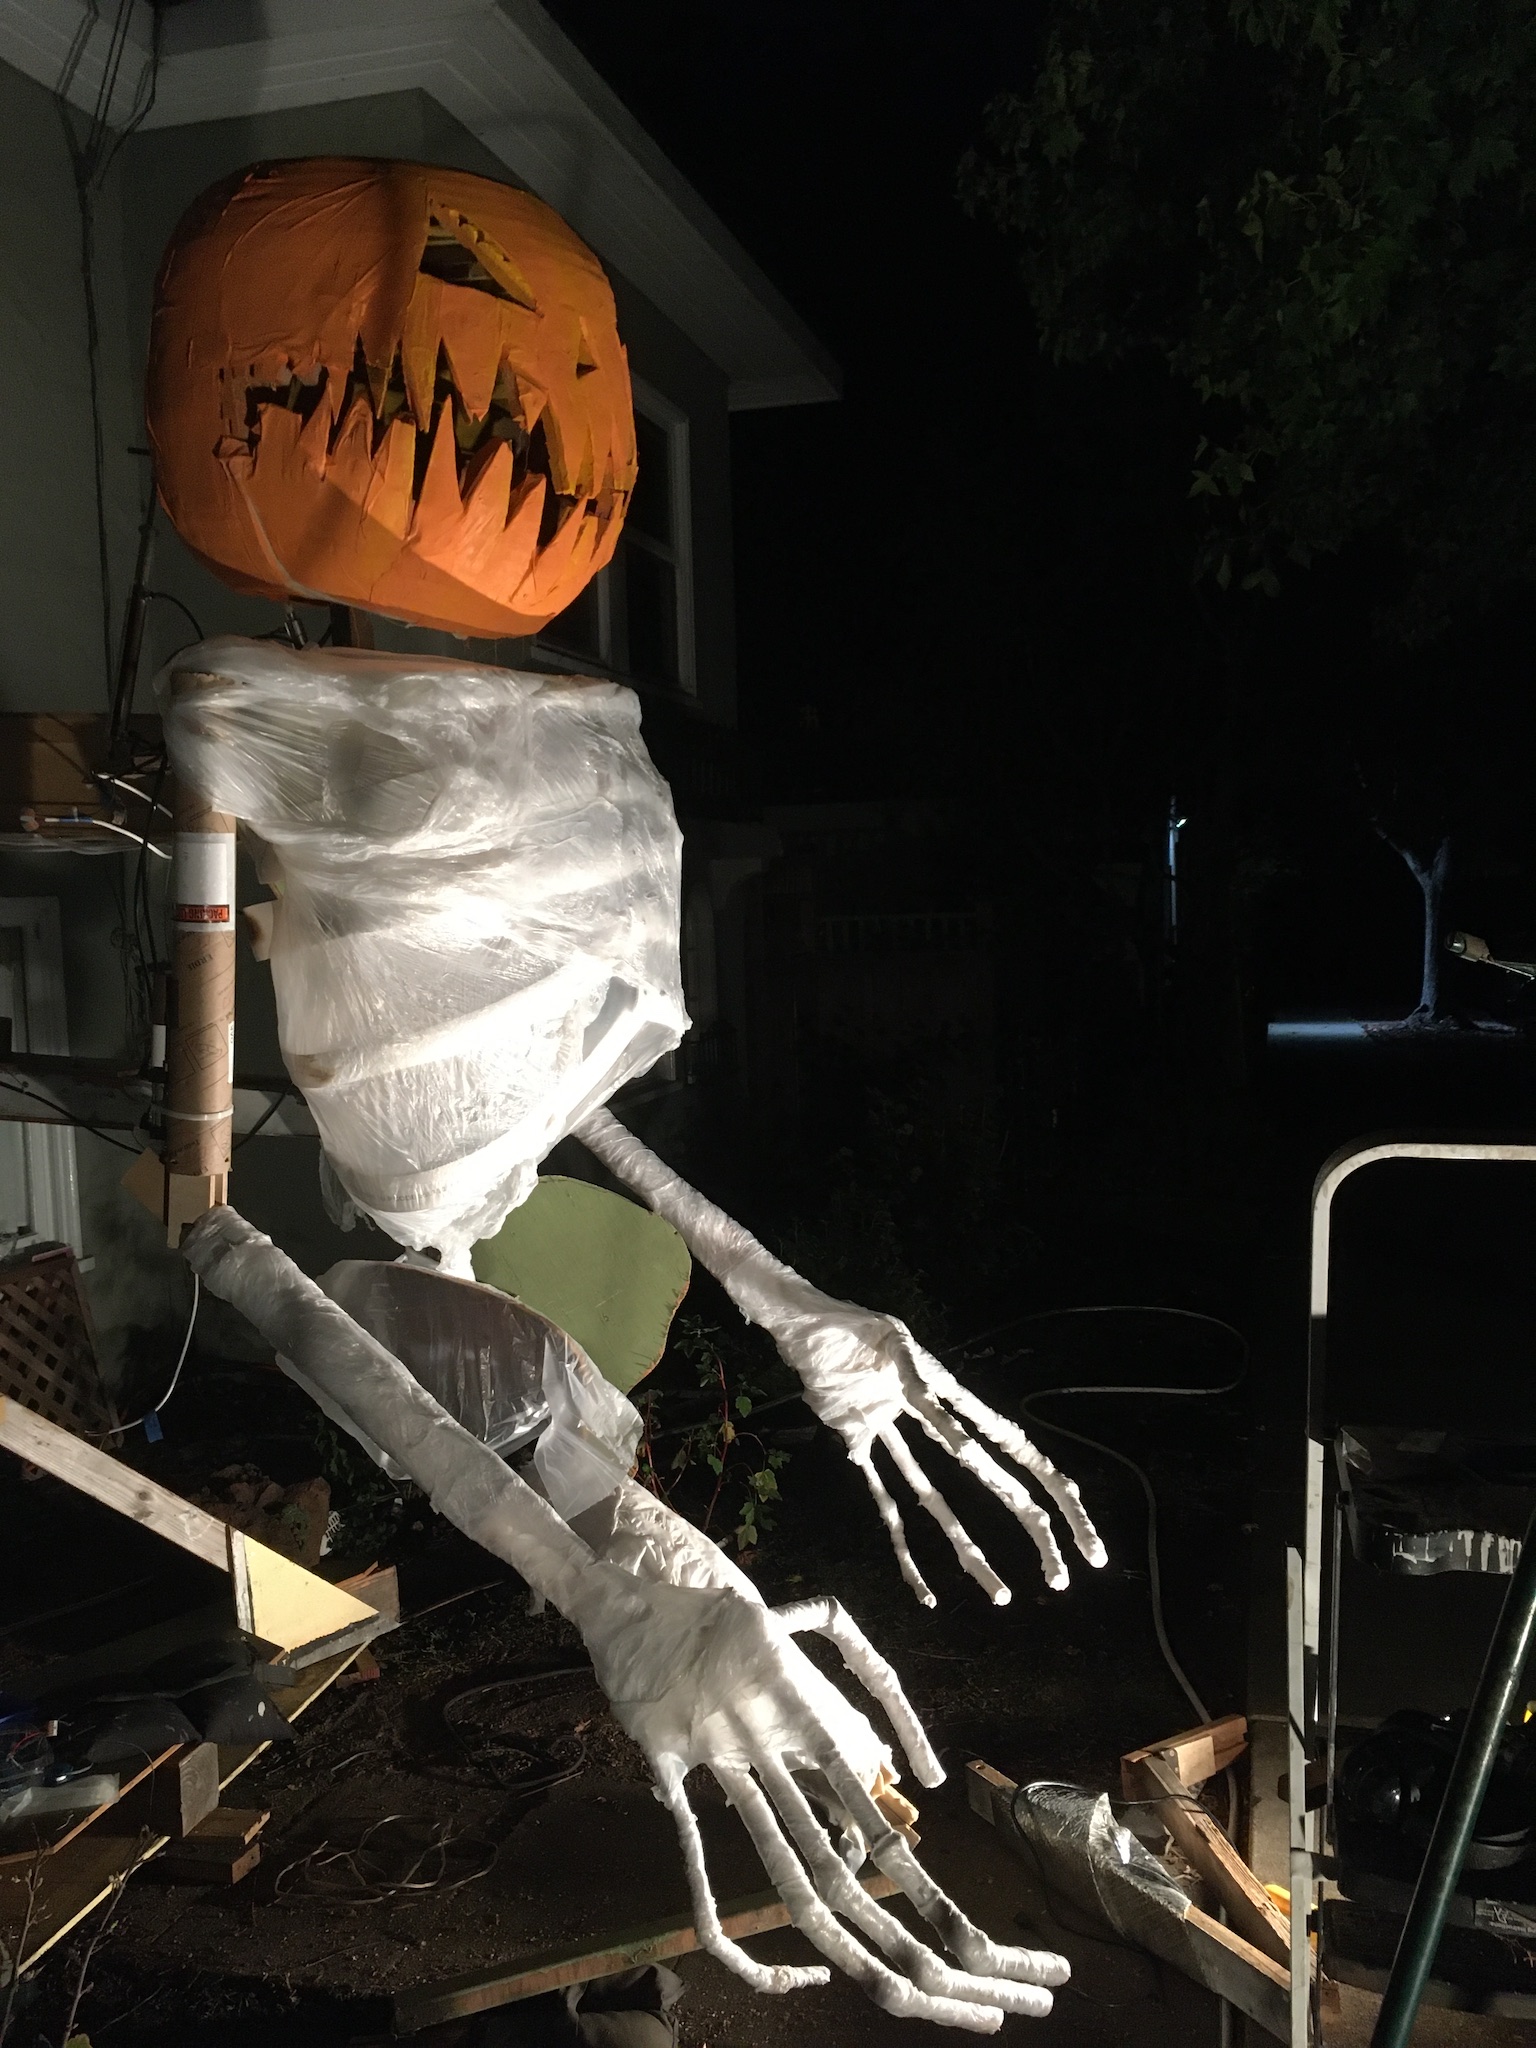 Pumpkin Man with his ribs, arms, and hands covered in plastic